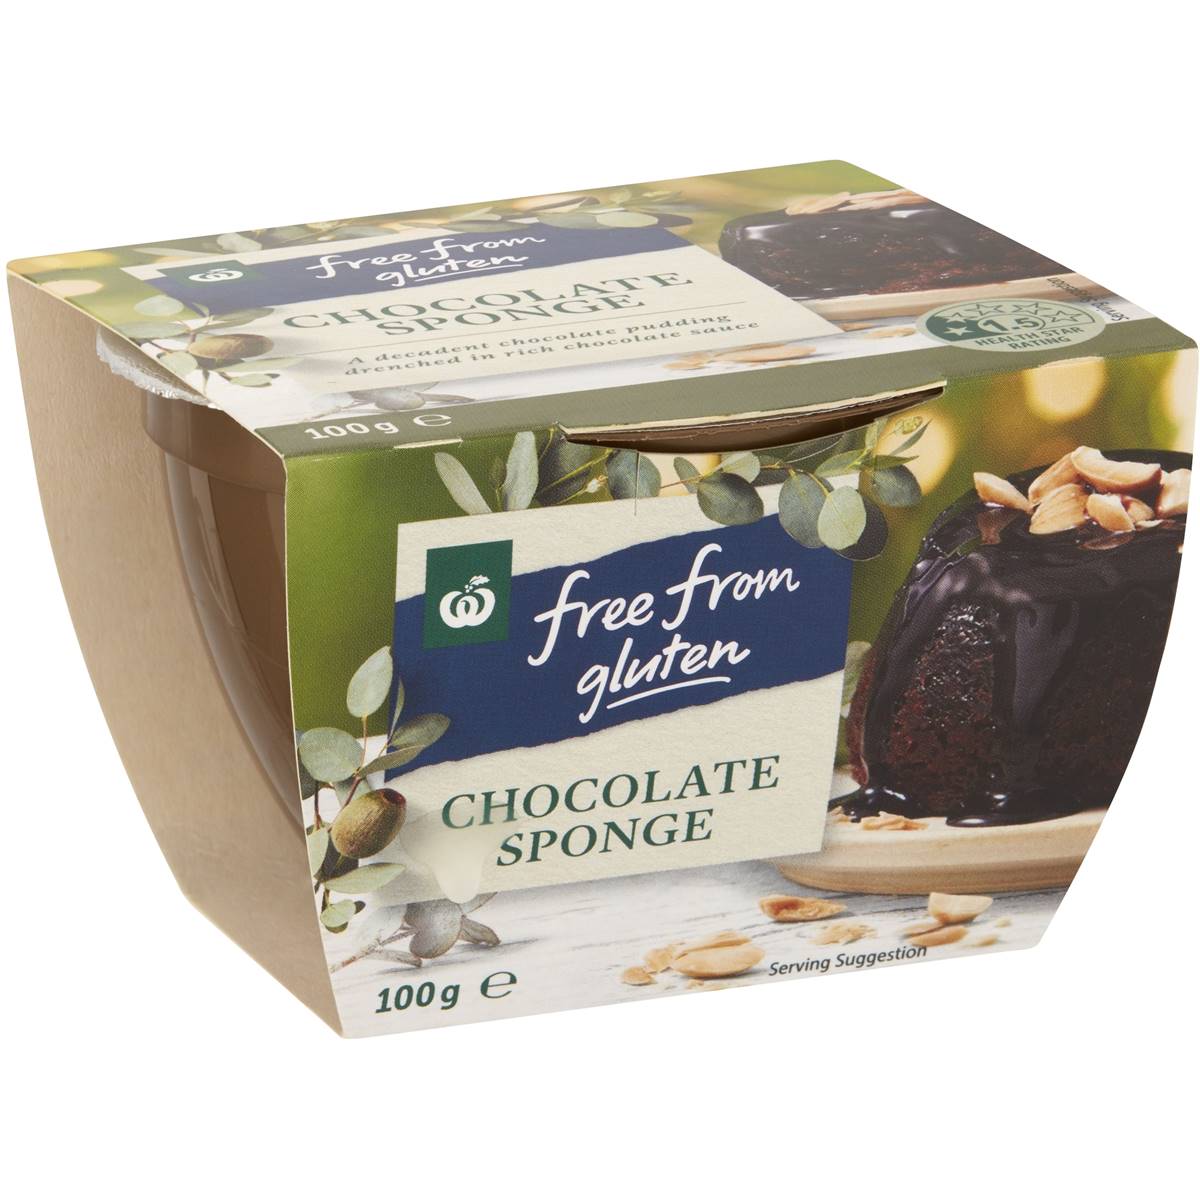 Calories in Woolworths Free From Gluten Chocolate Pudding